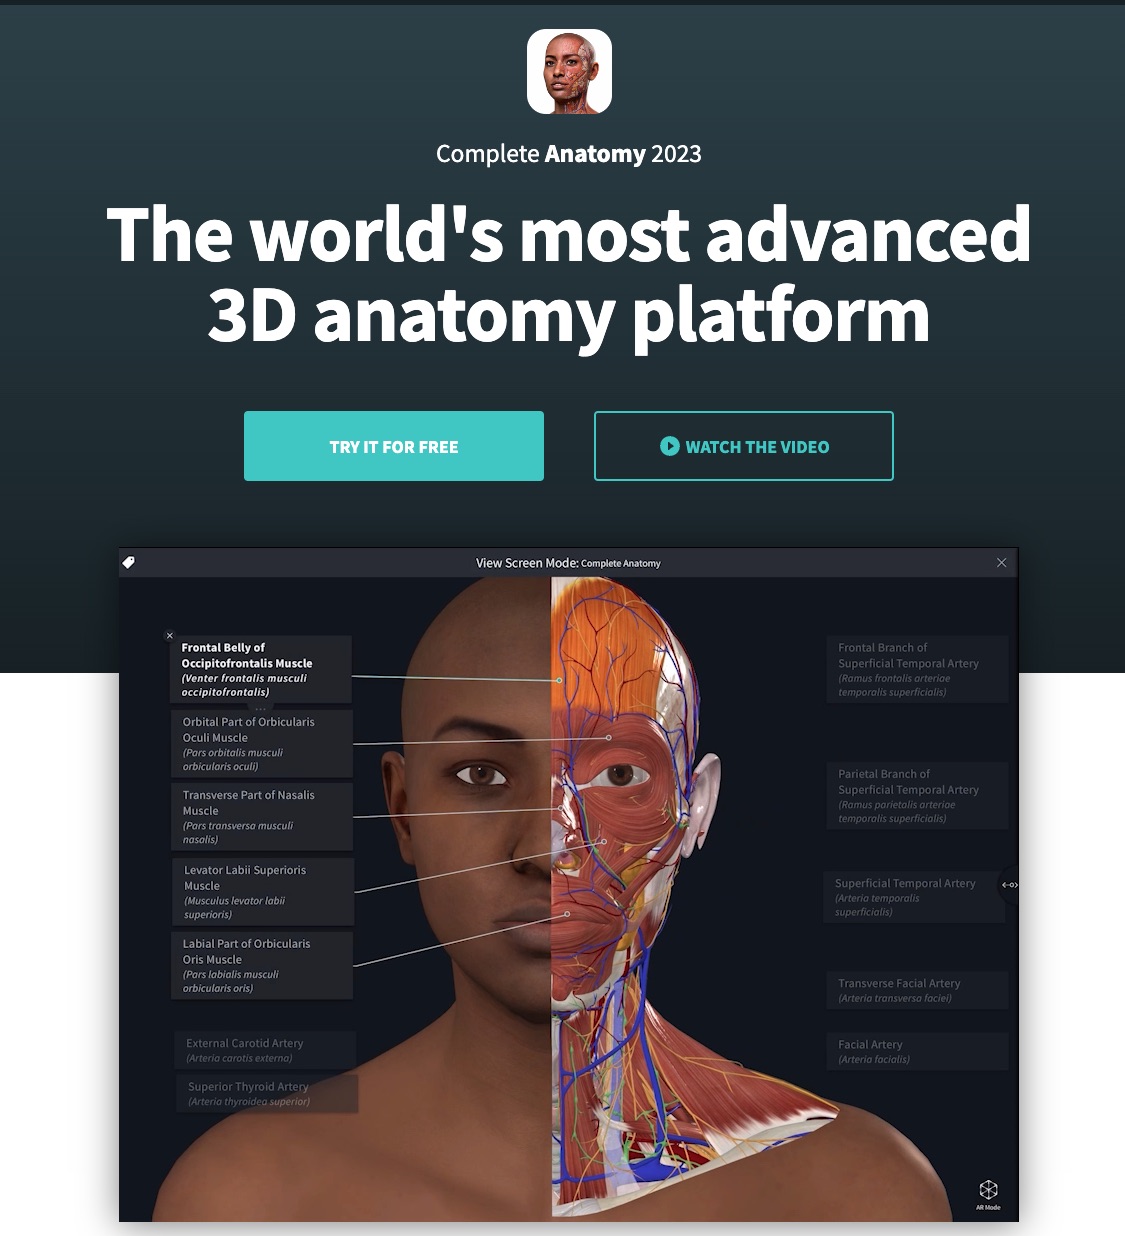 Part of the interface fo the 3d4medical’s app Complete Anatomy